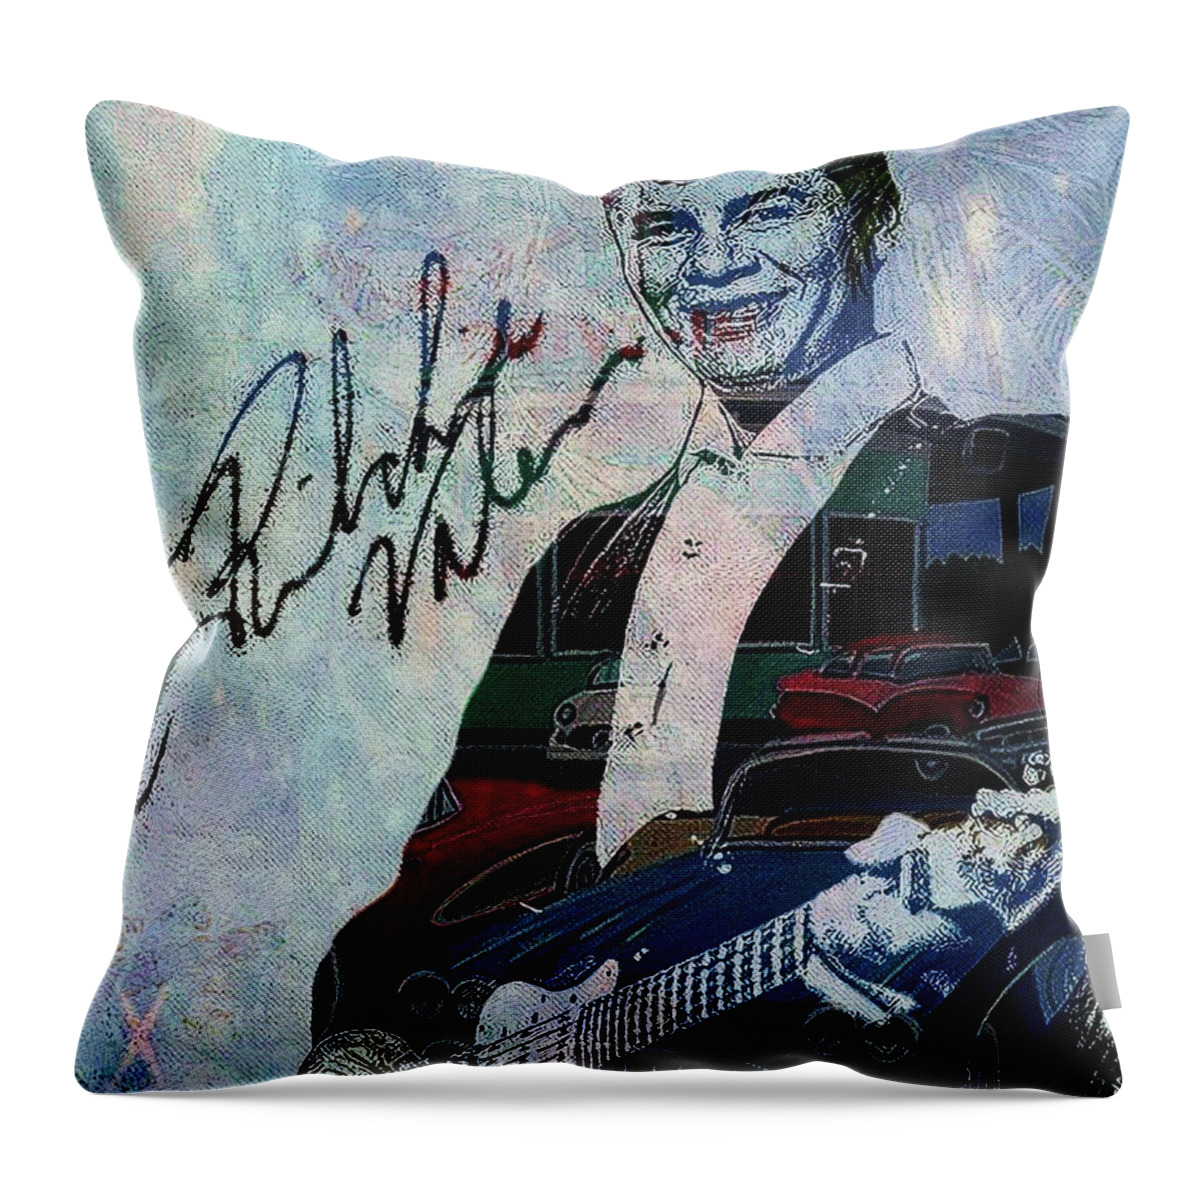  Throw Pillow featuring the digital art Ritchie Valens by Bob Smerecki